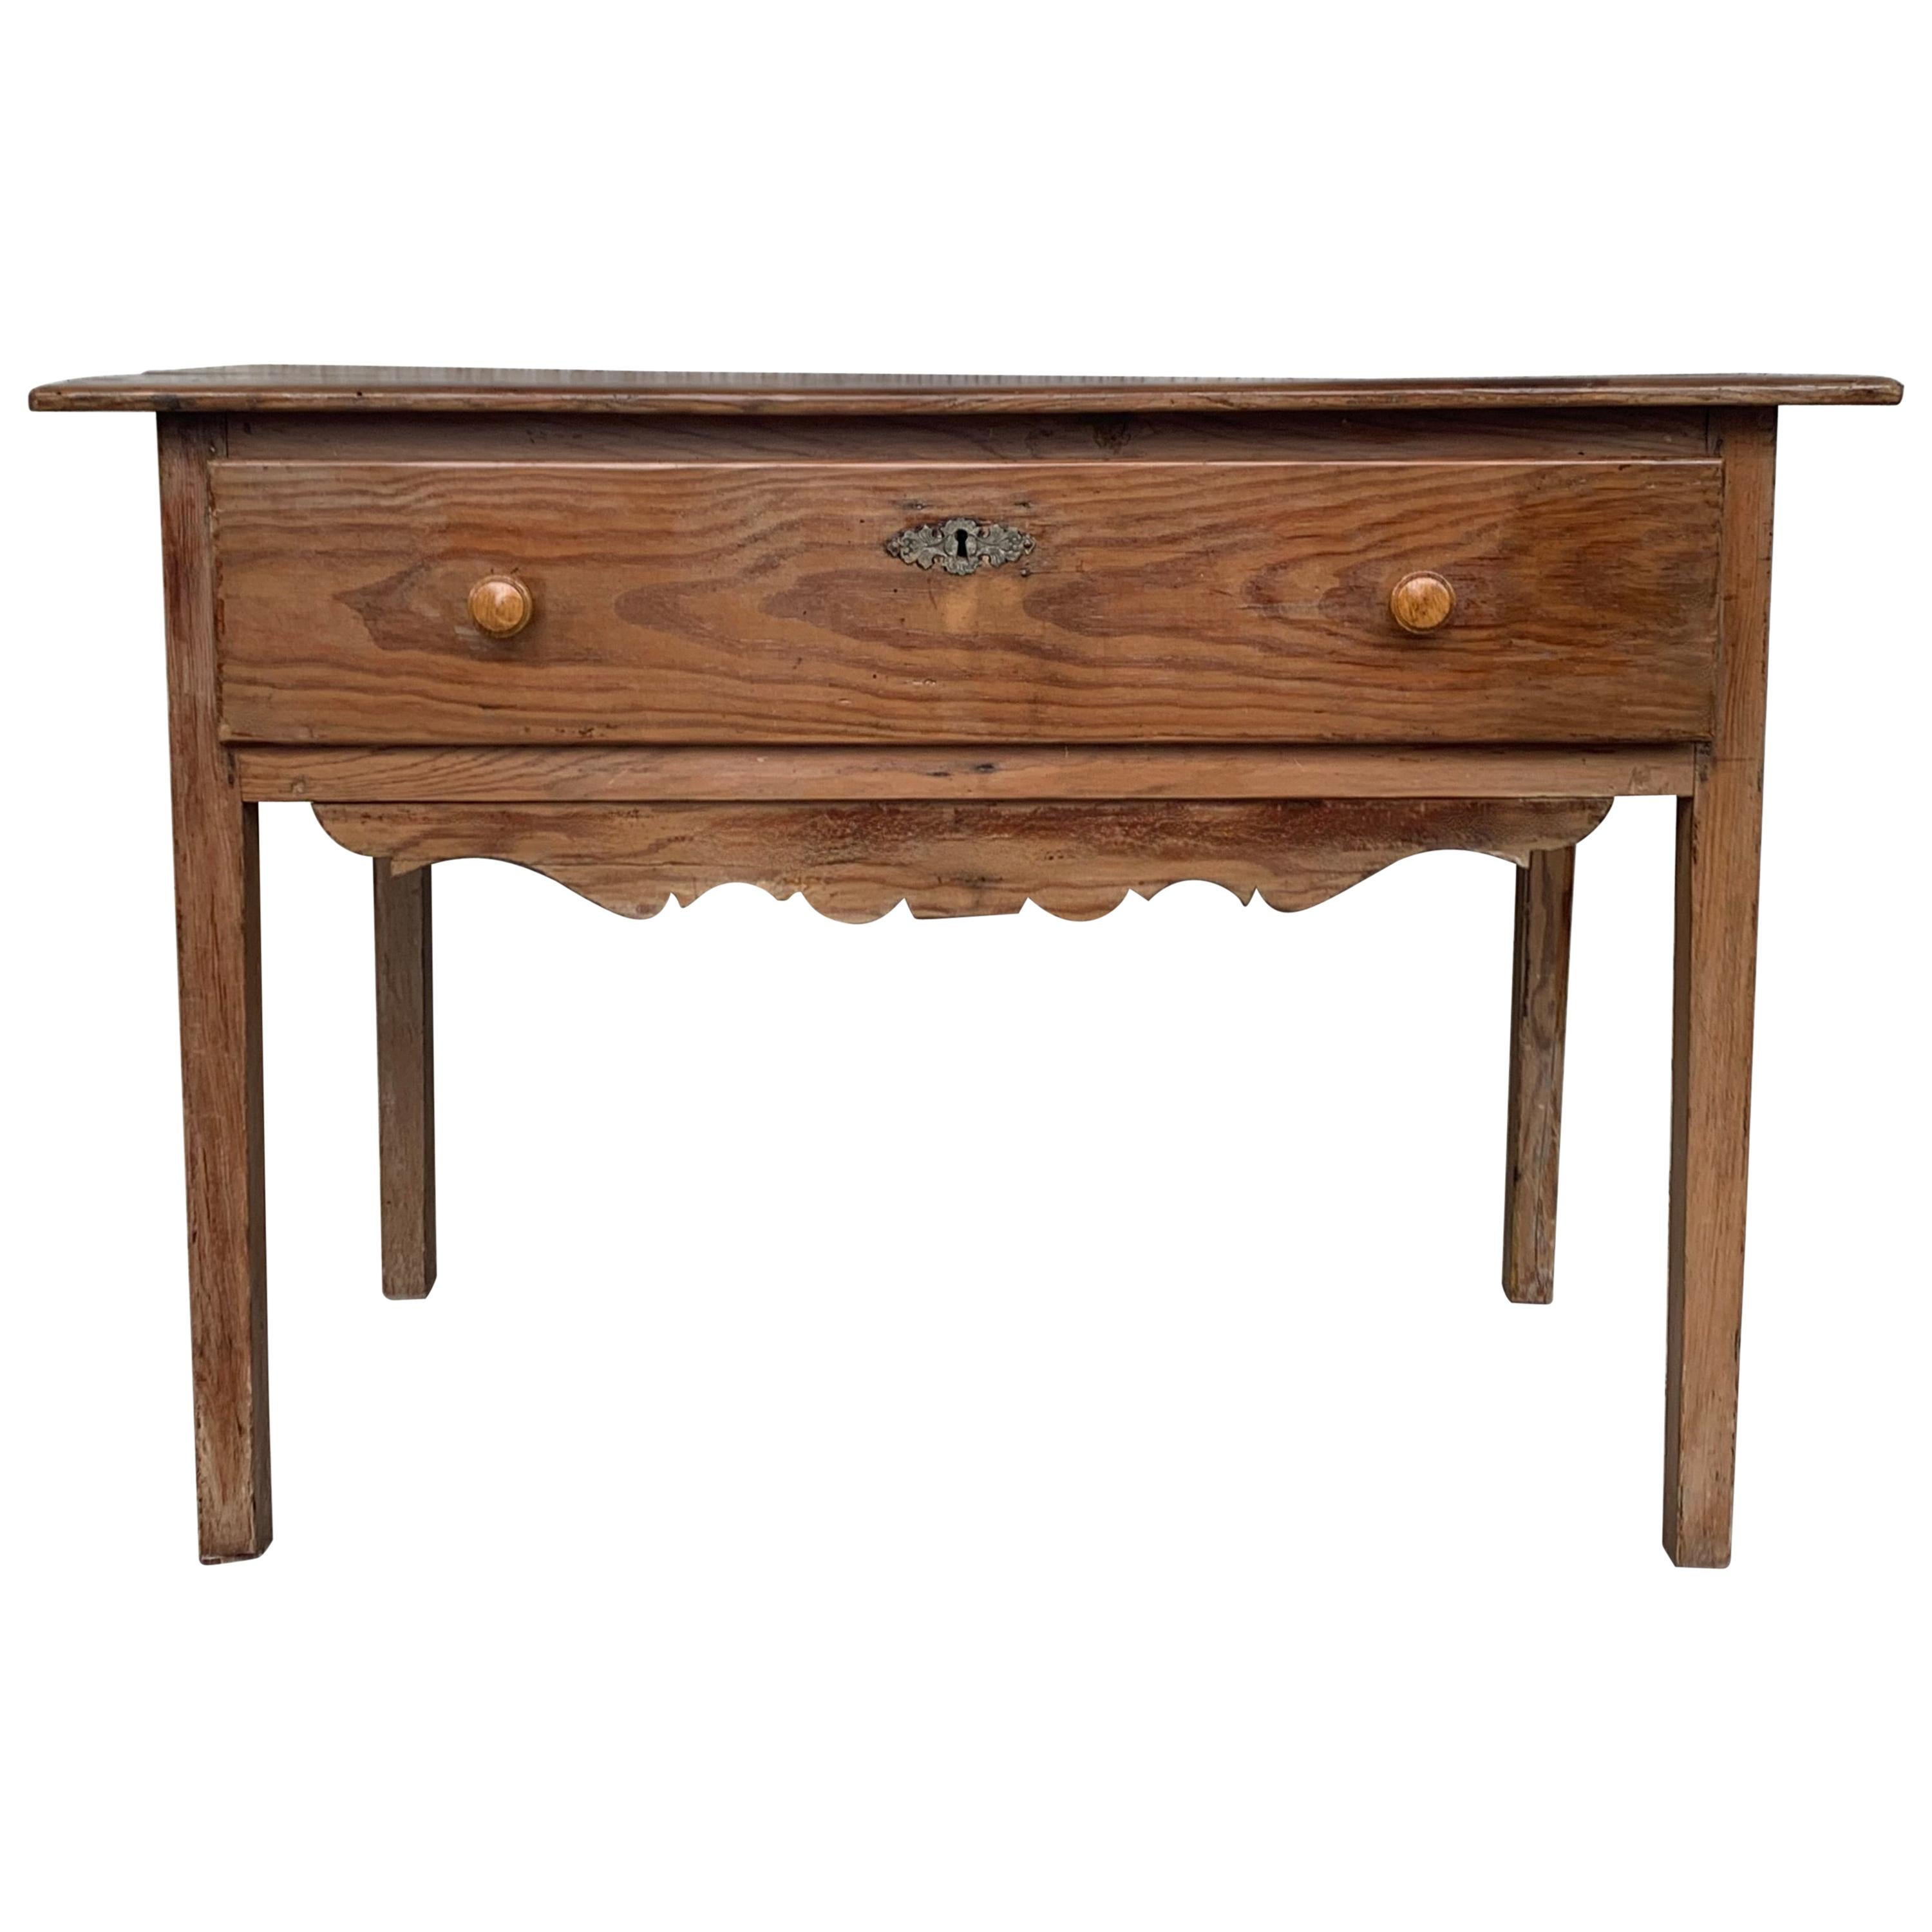 Country French Style Pine Farmhouse Side, Coffee or Nightstand Table with Drawer